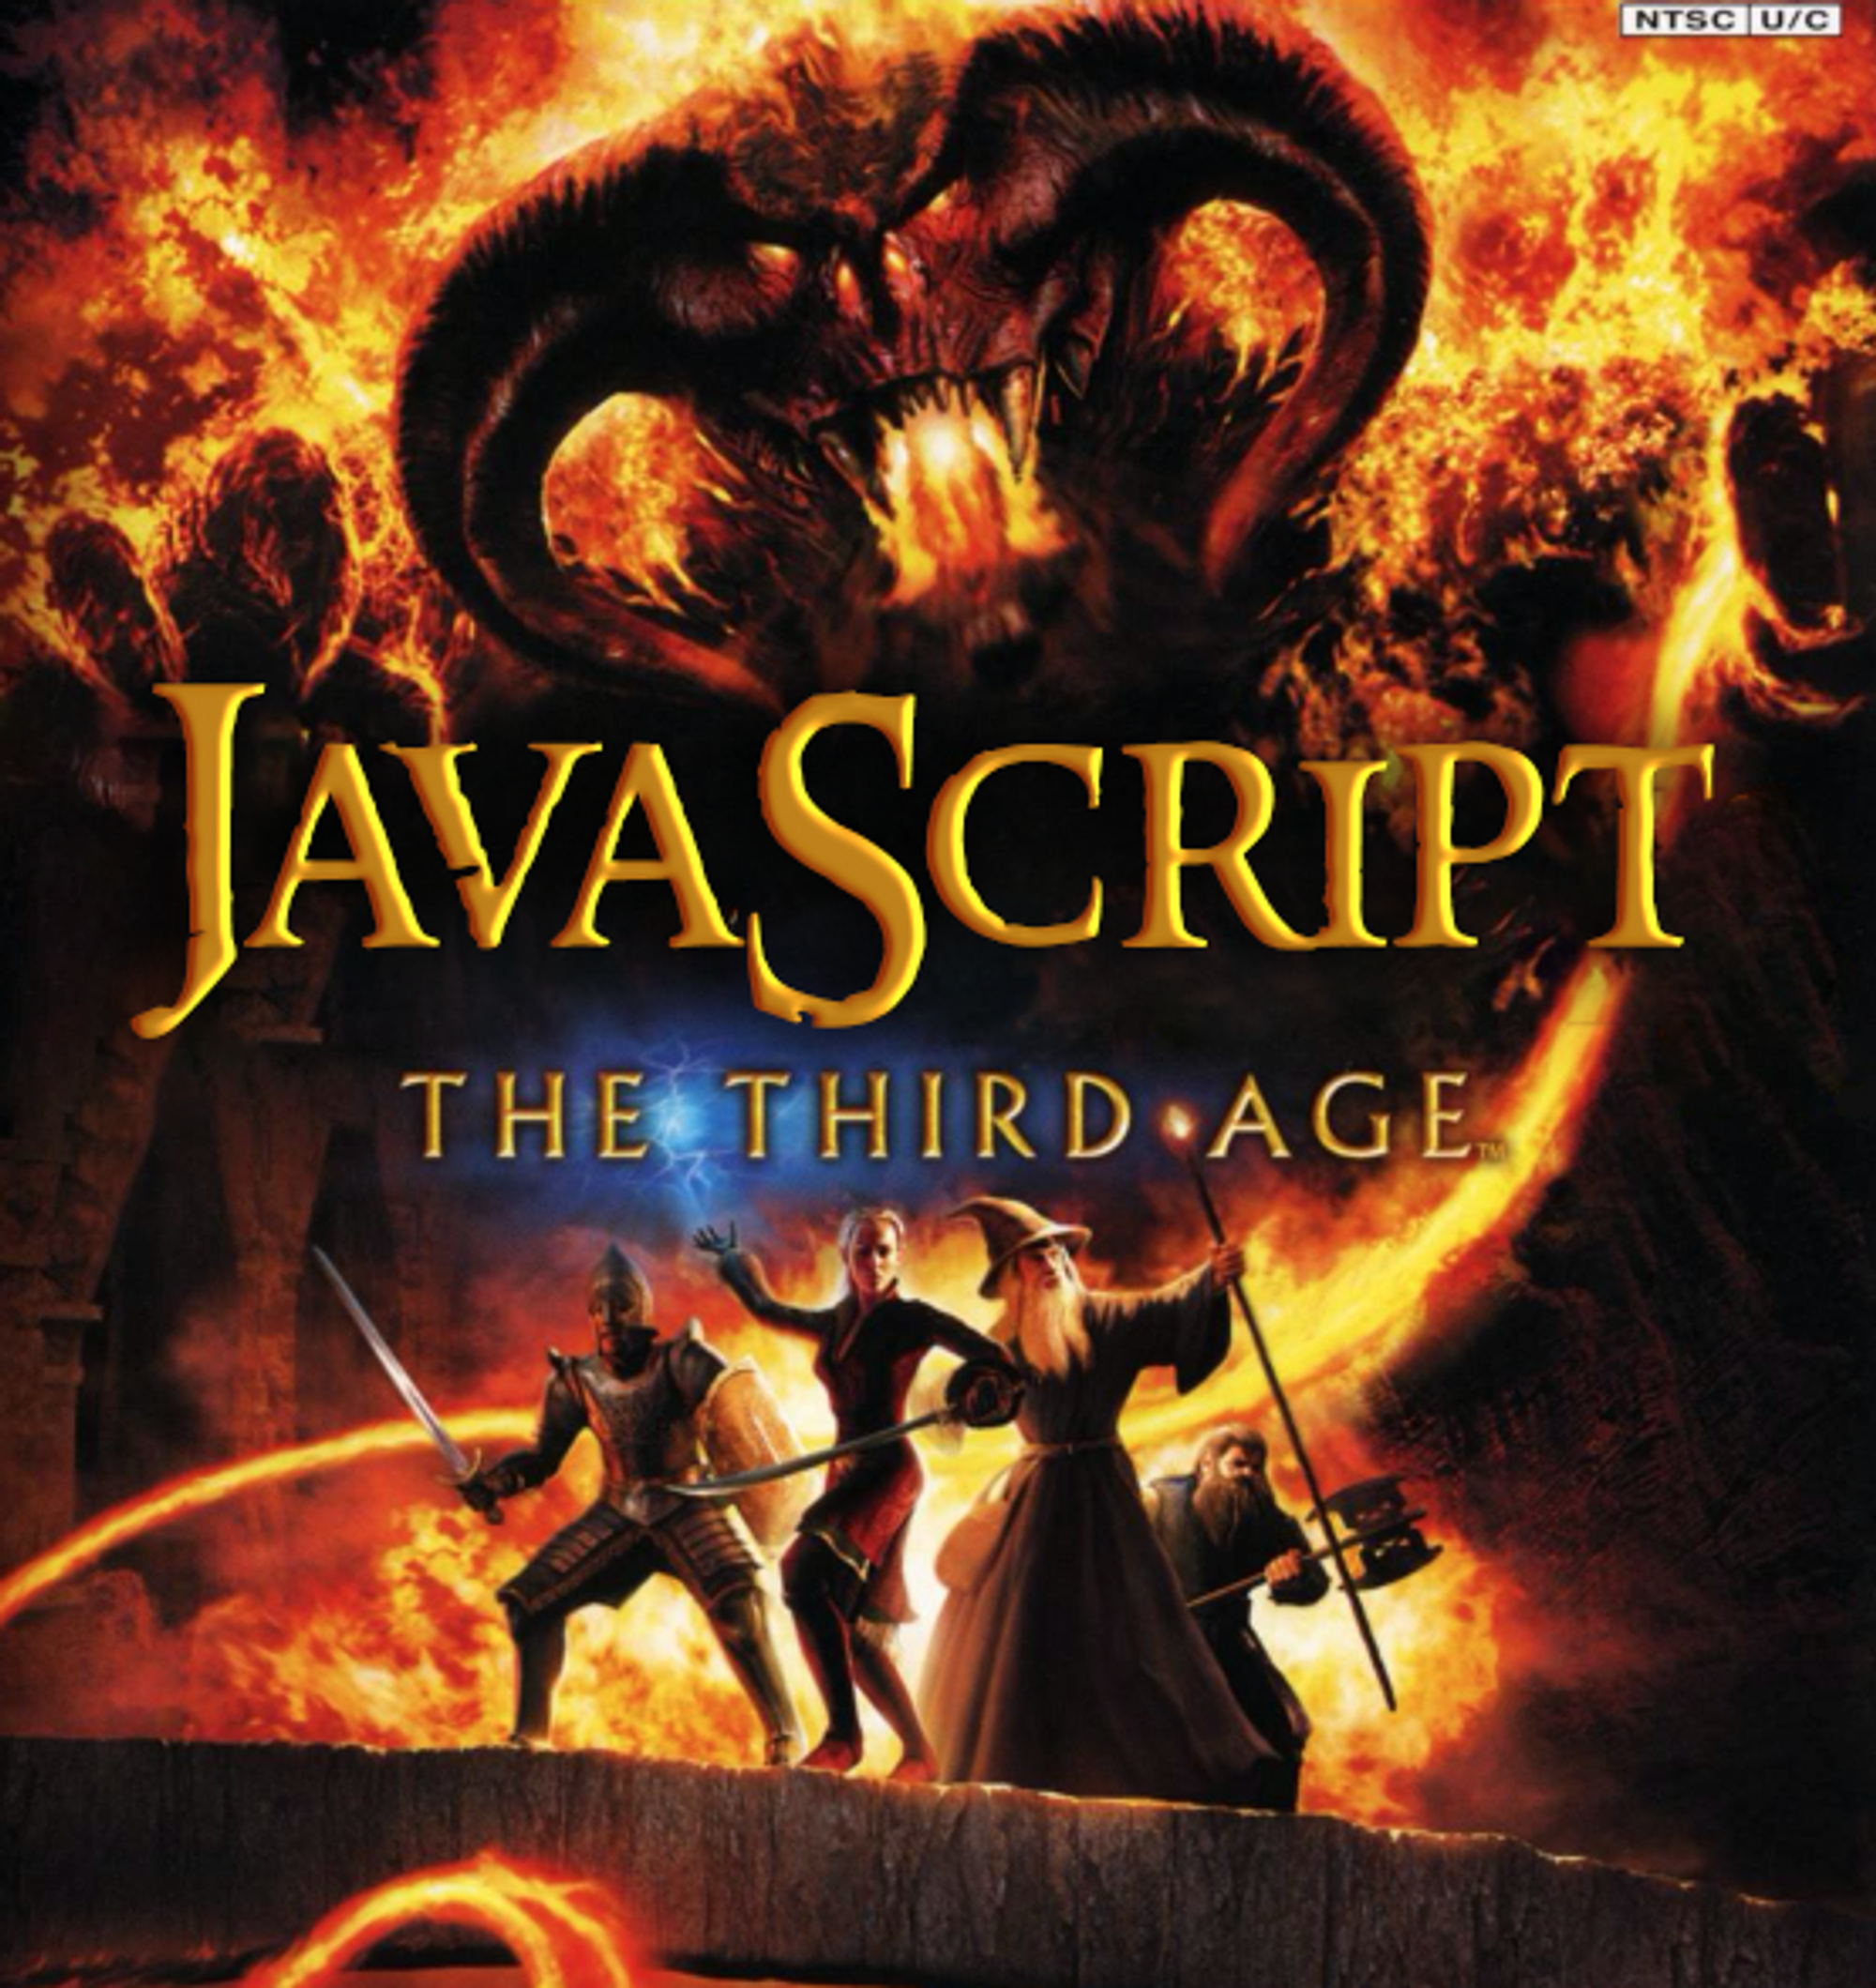 The Third Age of JavaScript